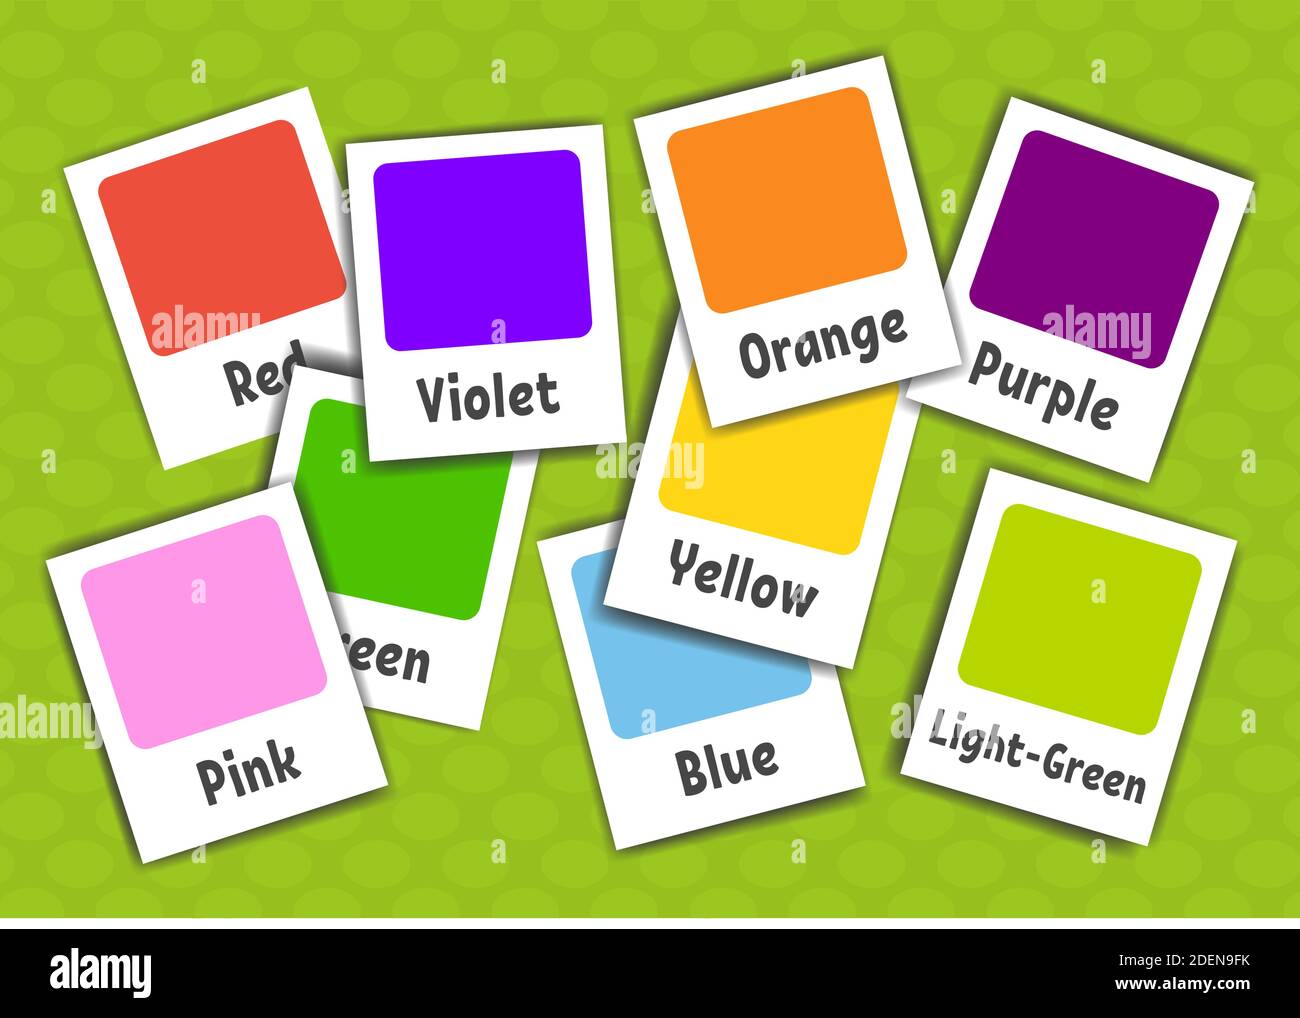 Flash cards. Learning colors. Vector illustration isolated on green background. Cartoon style. Stock Vector